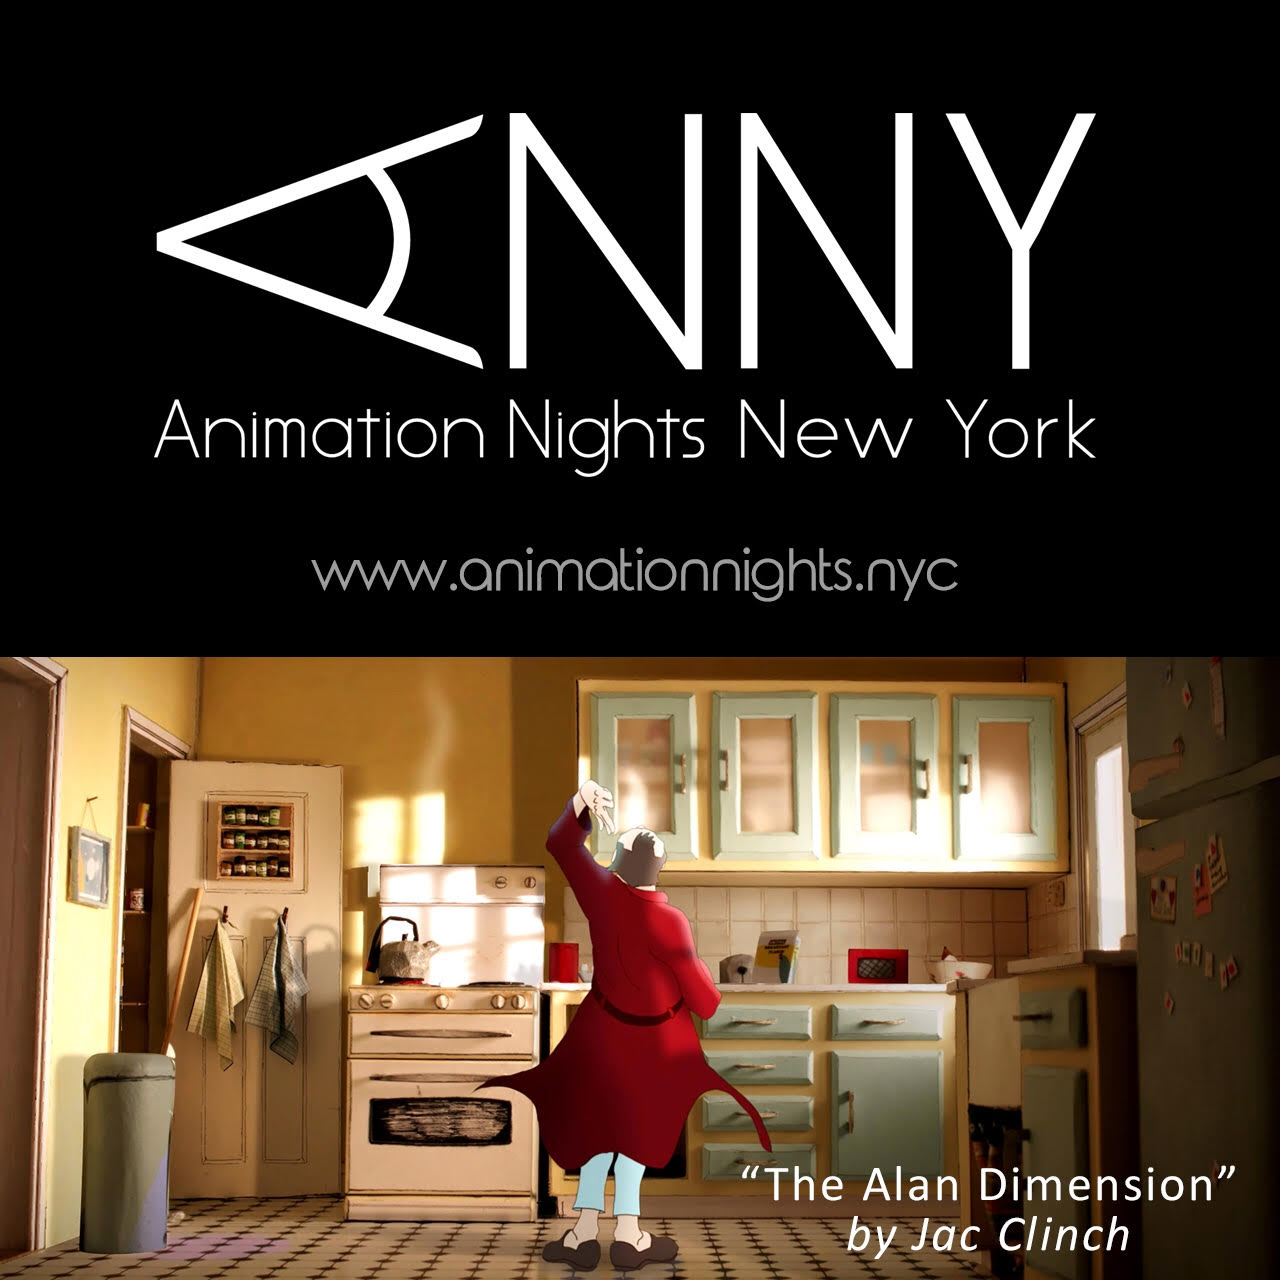 Check Out Animation Nights New York’s Upcoming Program for April 12th, 2017